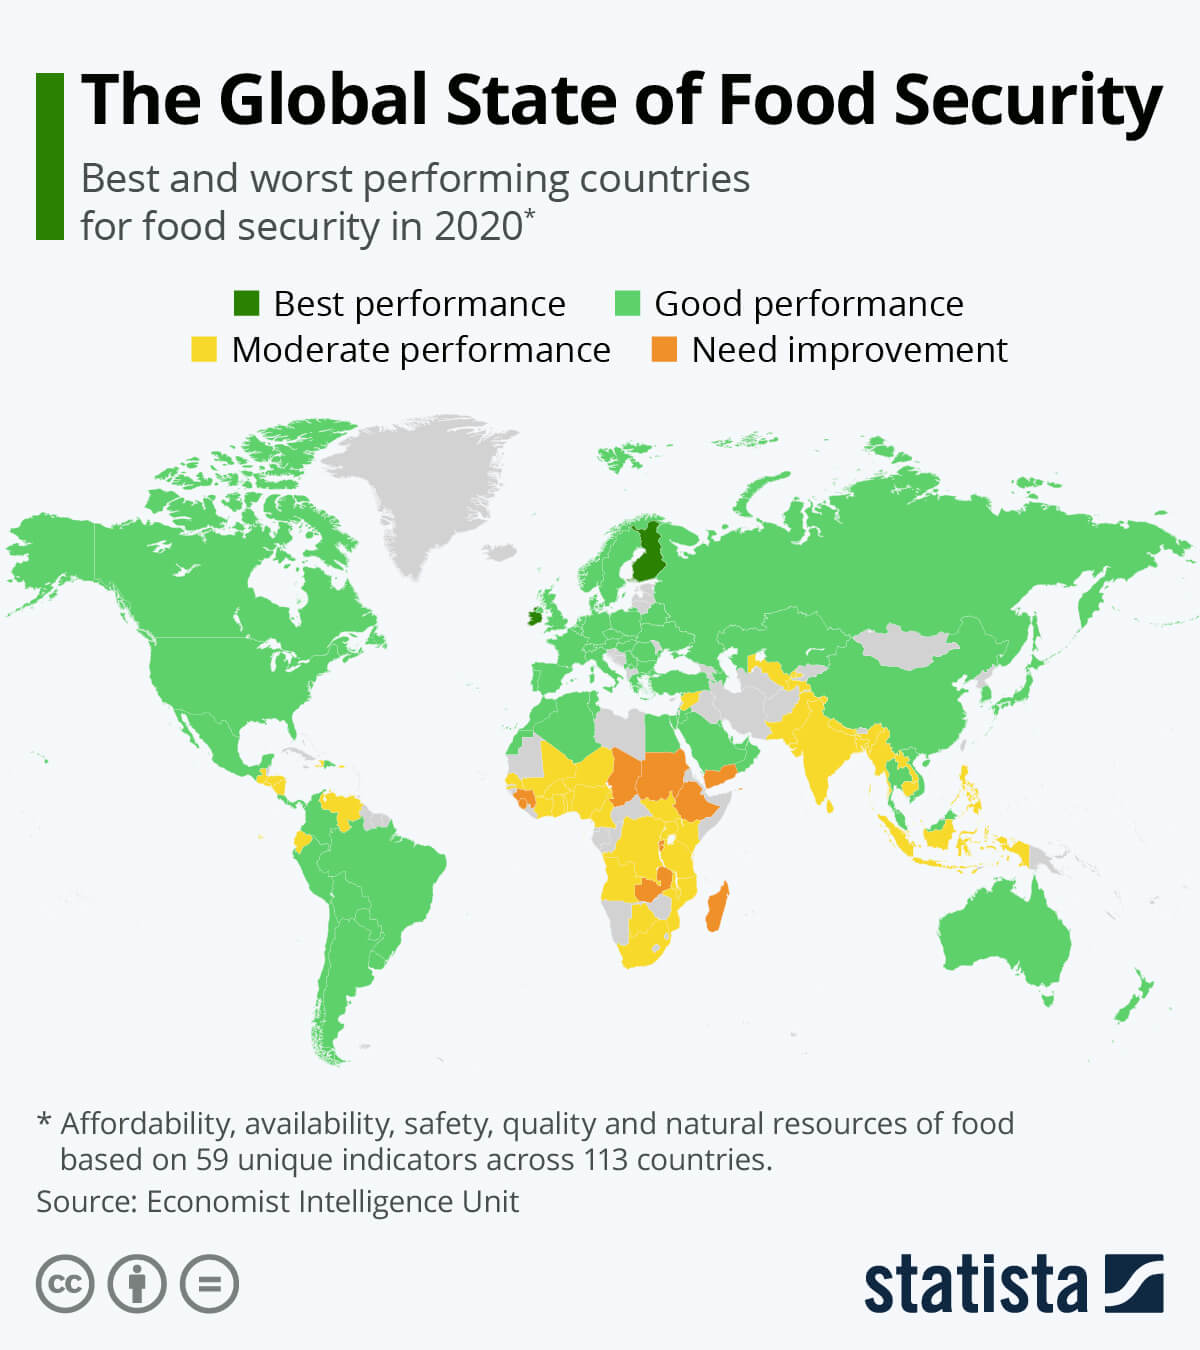 This chart shows the best and worst performing countries for food security in 2020.